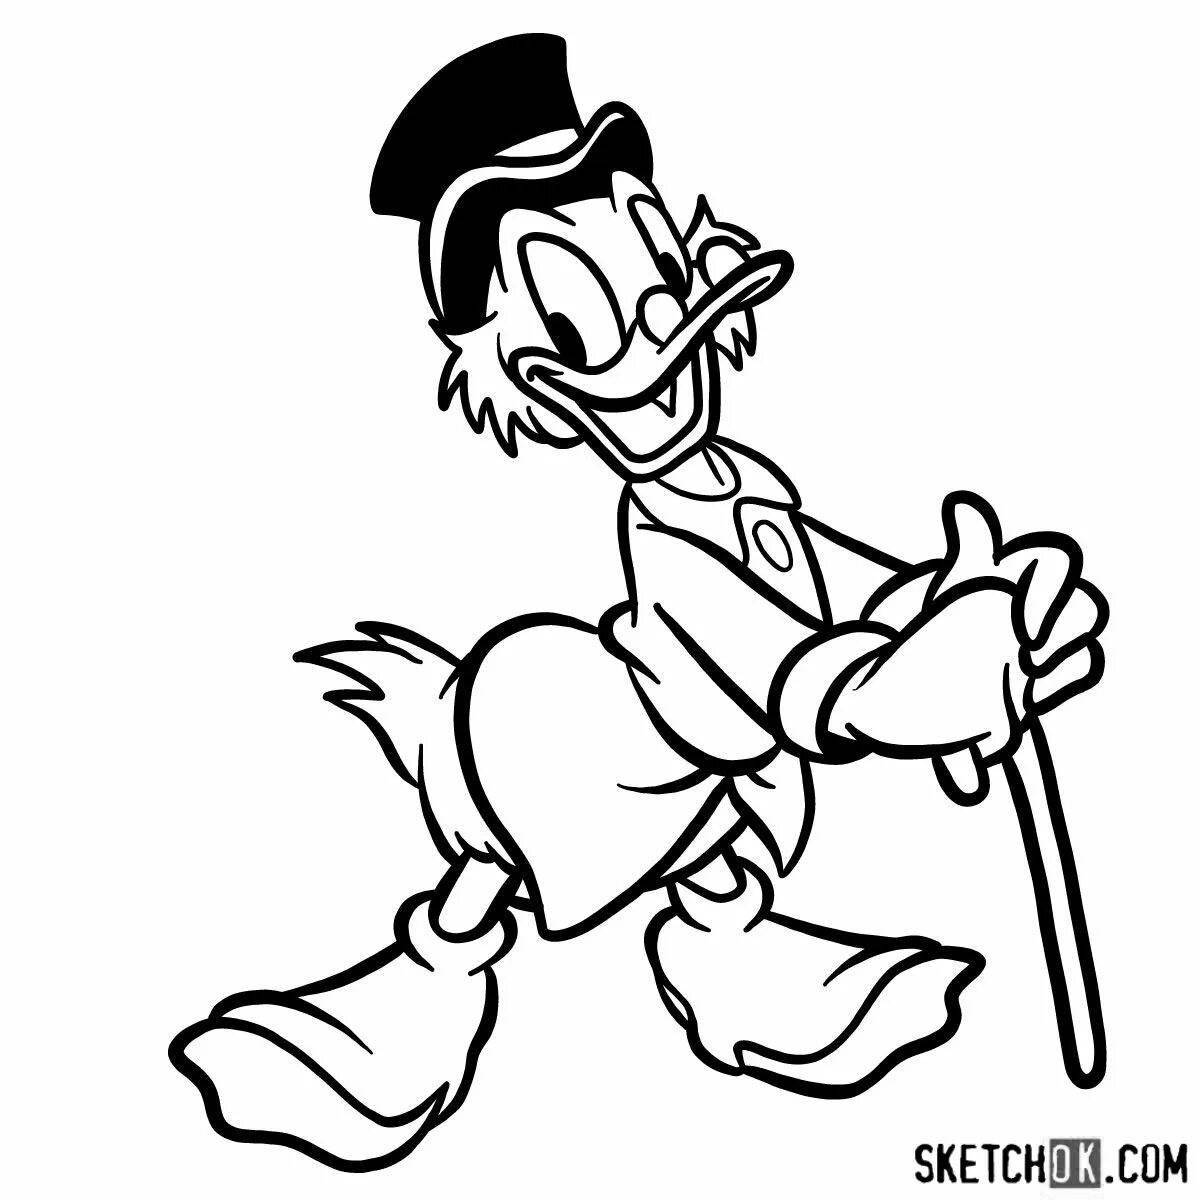 Bright donald duck with money